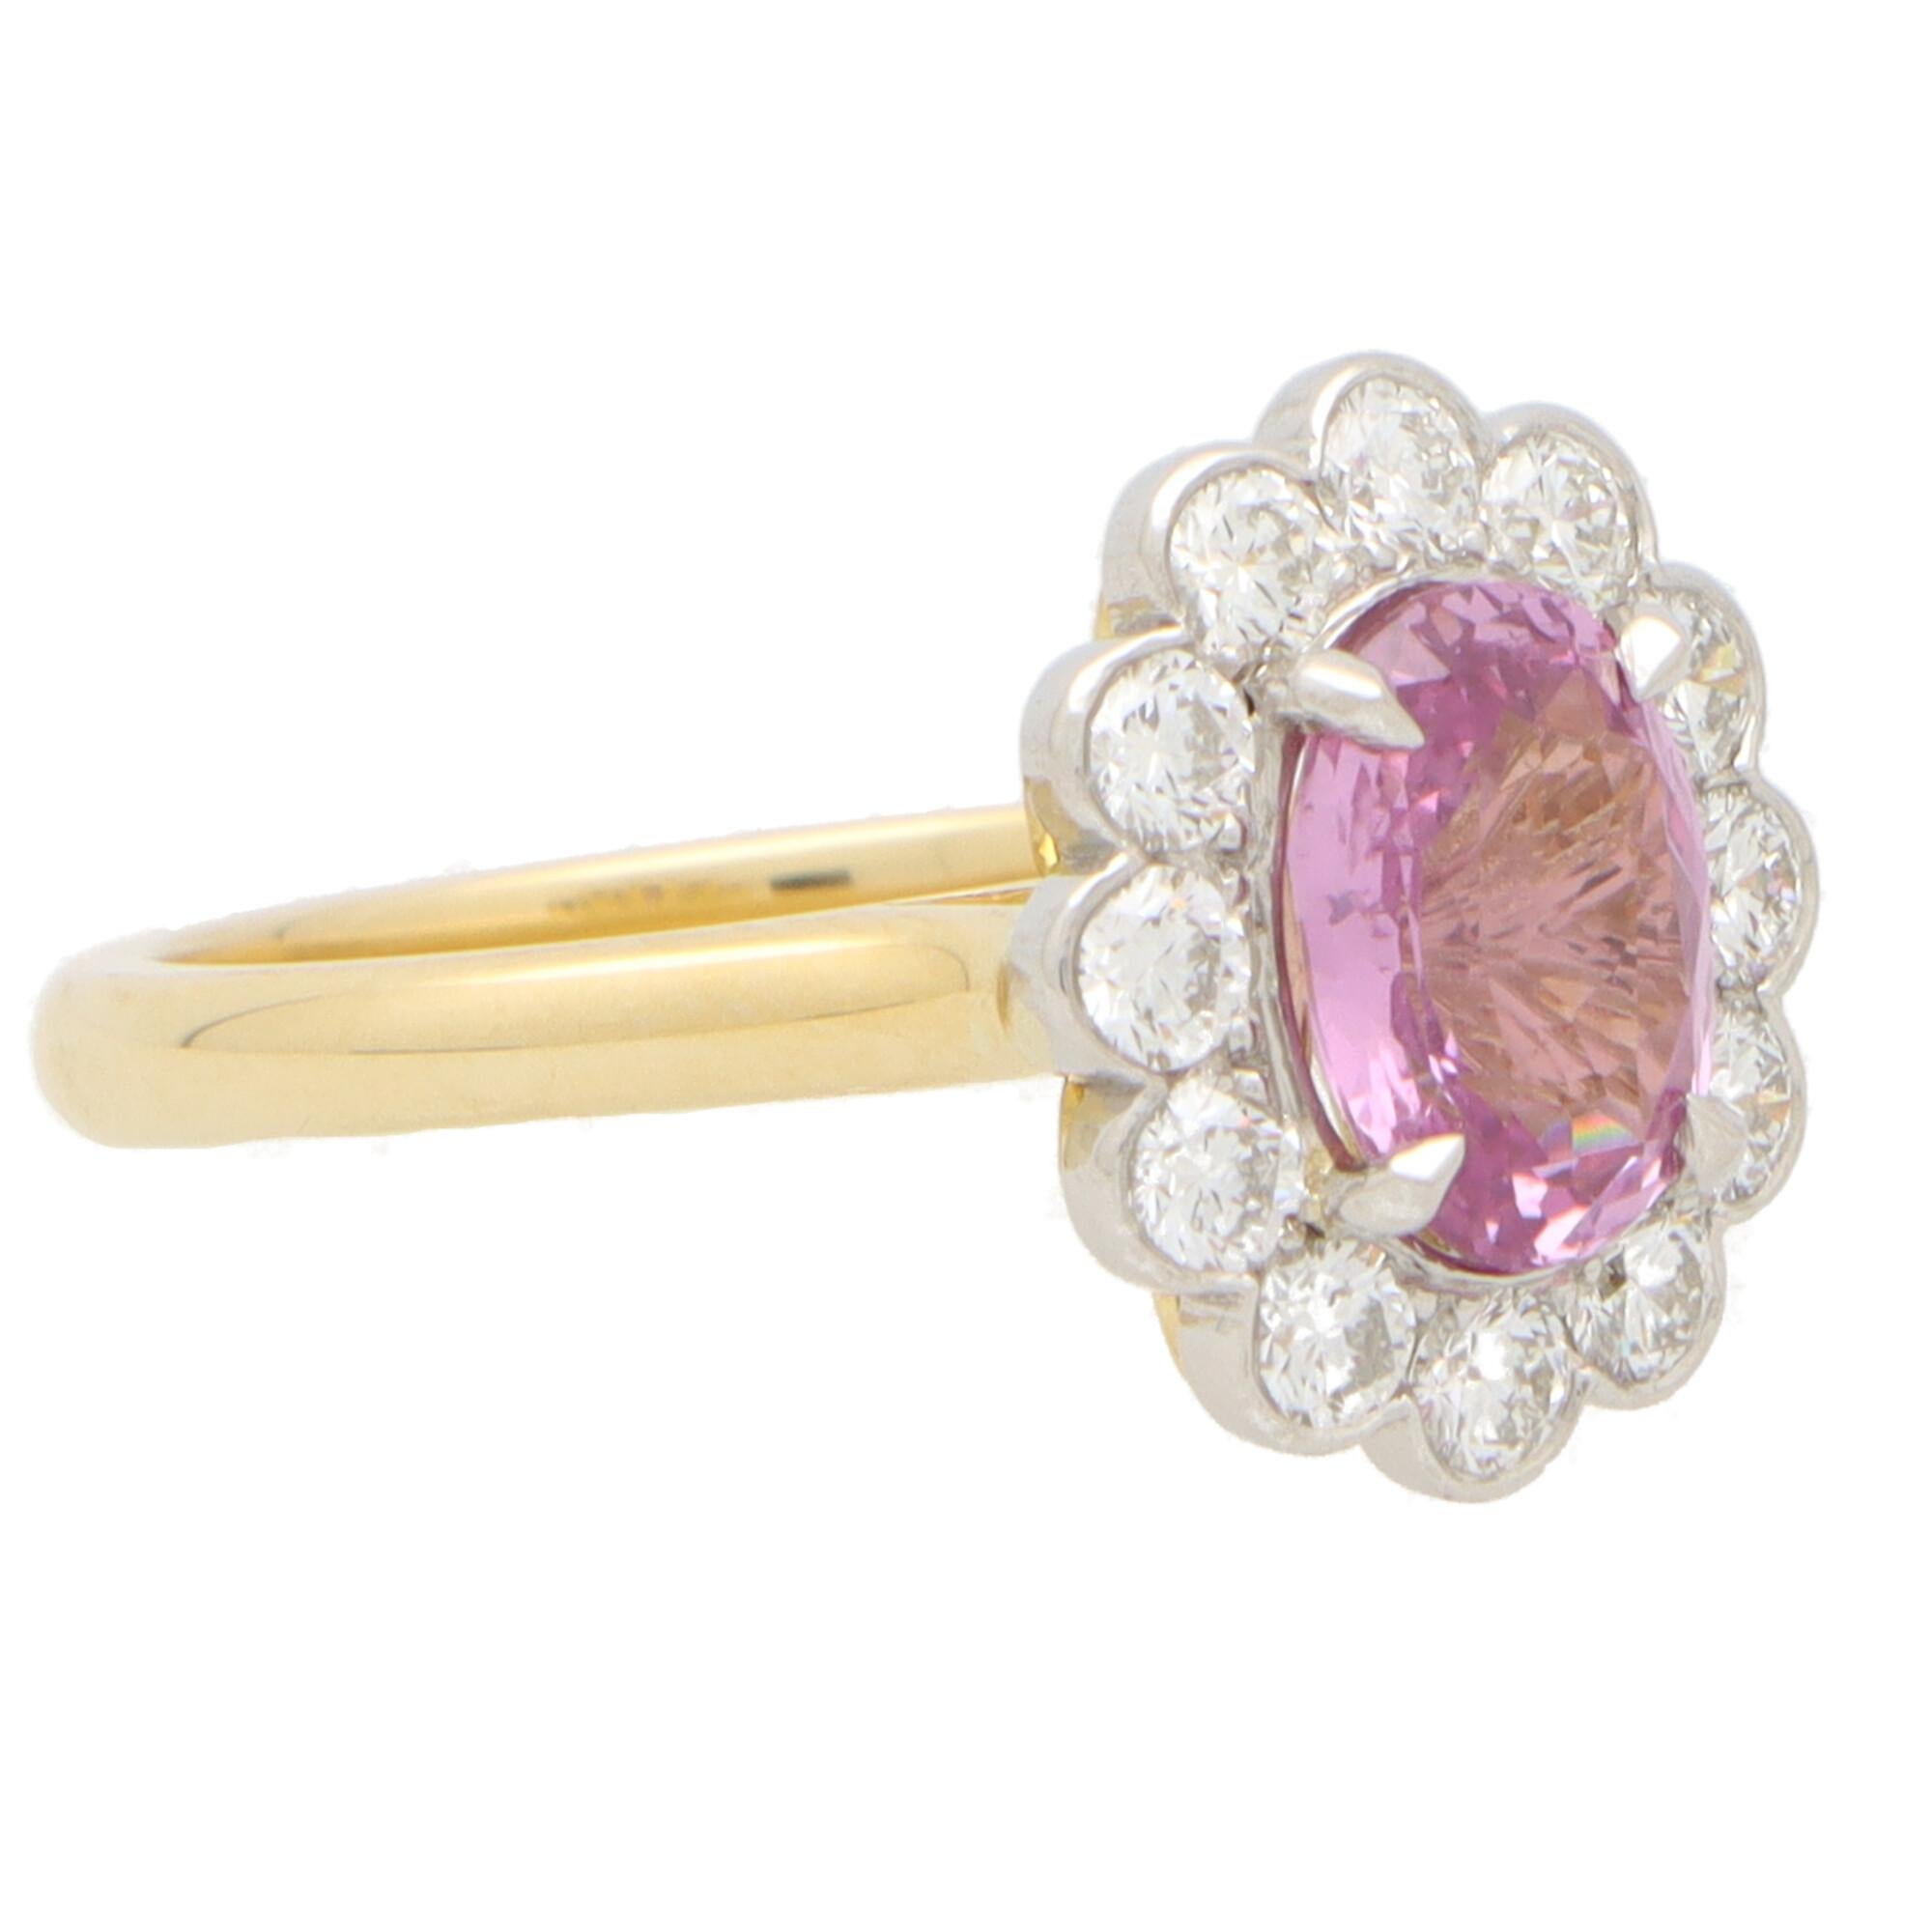 Oval Cut Contemporary Pink Sapphire and Diamond Floral Cluster Ring in 18k Gold